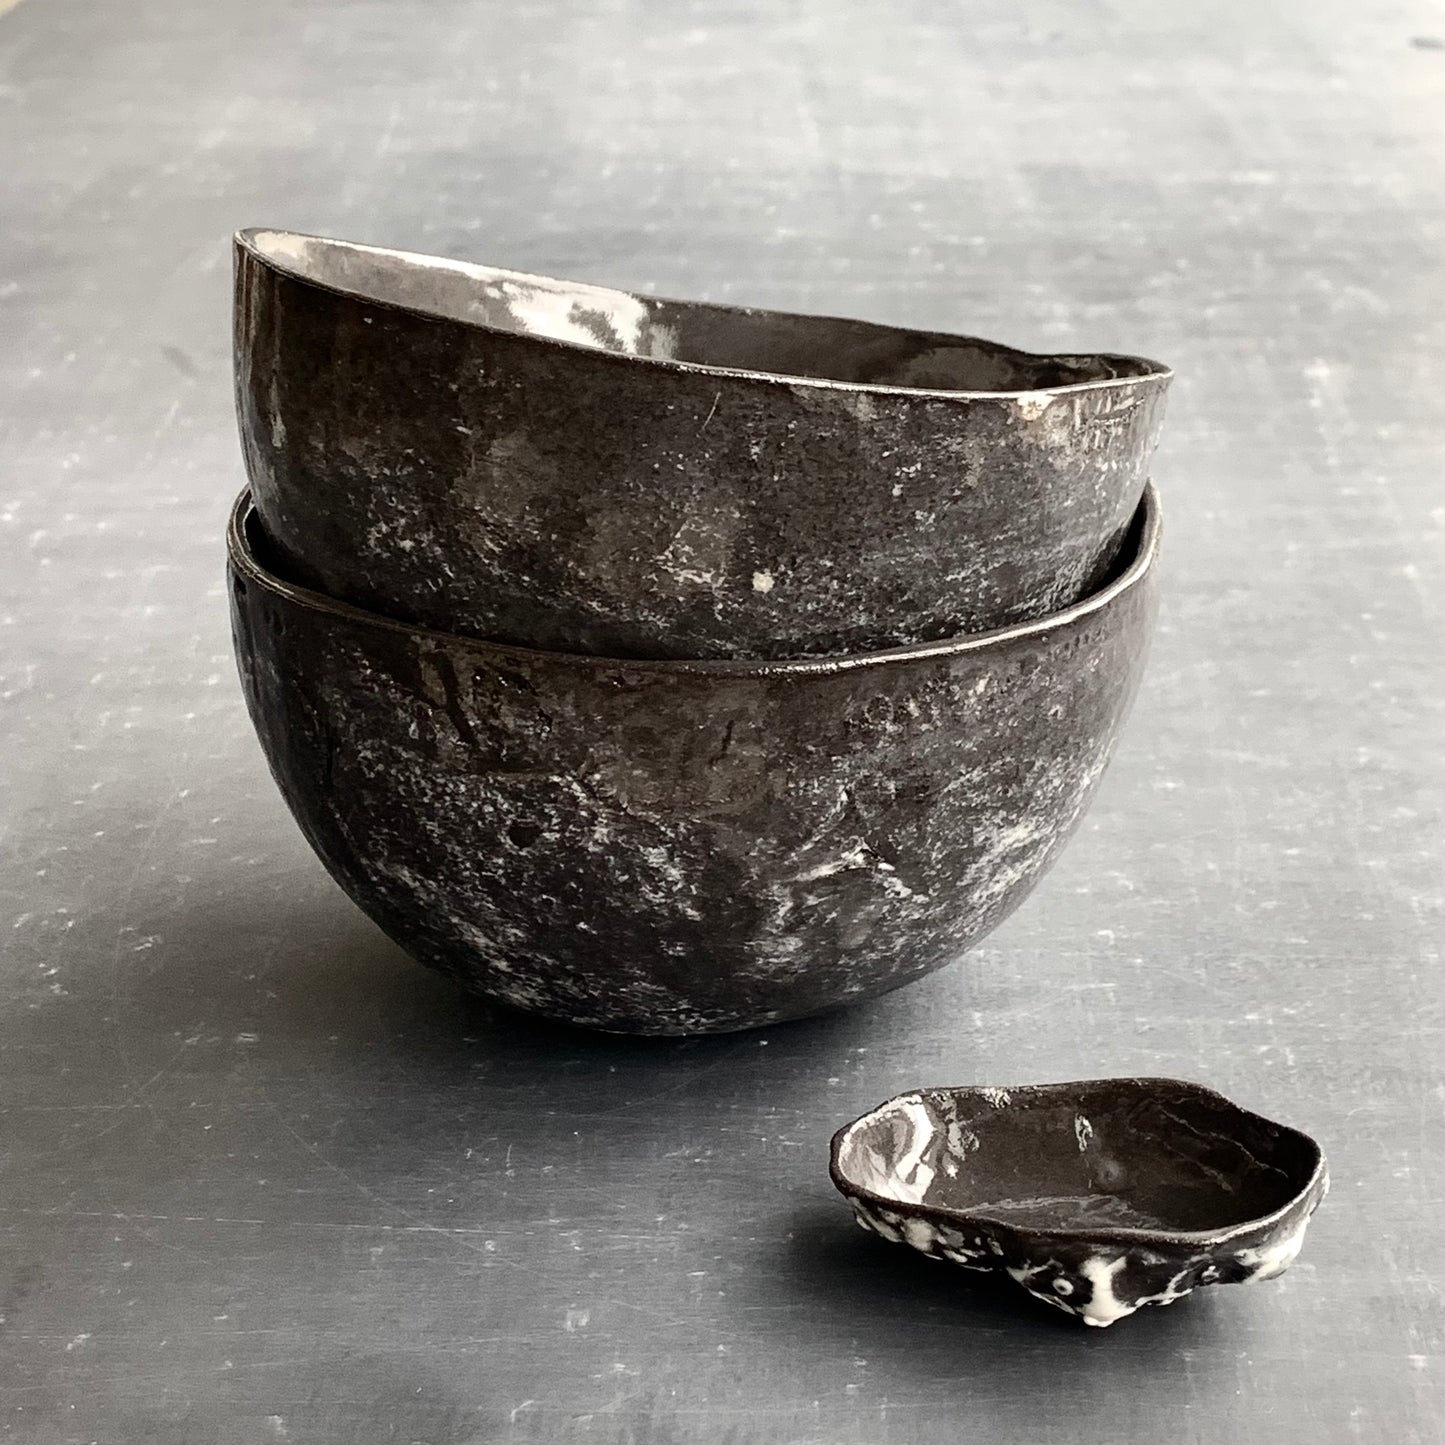 Unique handmade black ceramic bowl from the Amazon collection. This large bowl made of black clay enriches your table setting with a mysterious magical feel or will surprise someone as a personal ceramic gift. A one of a kind signature piece of tableware with a unique design and white porcelain slib.